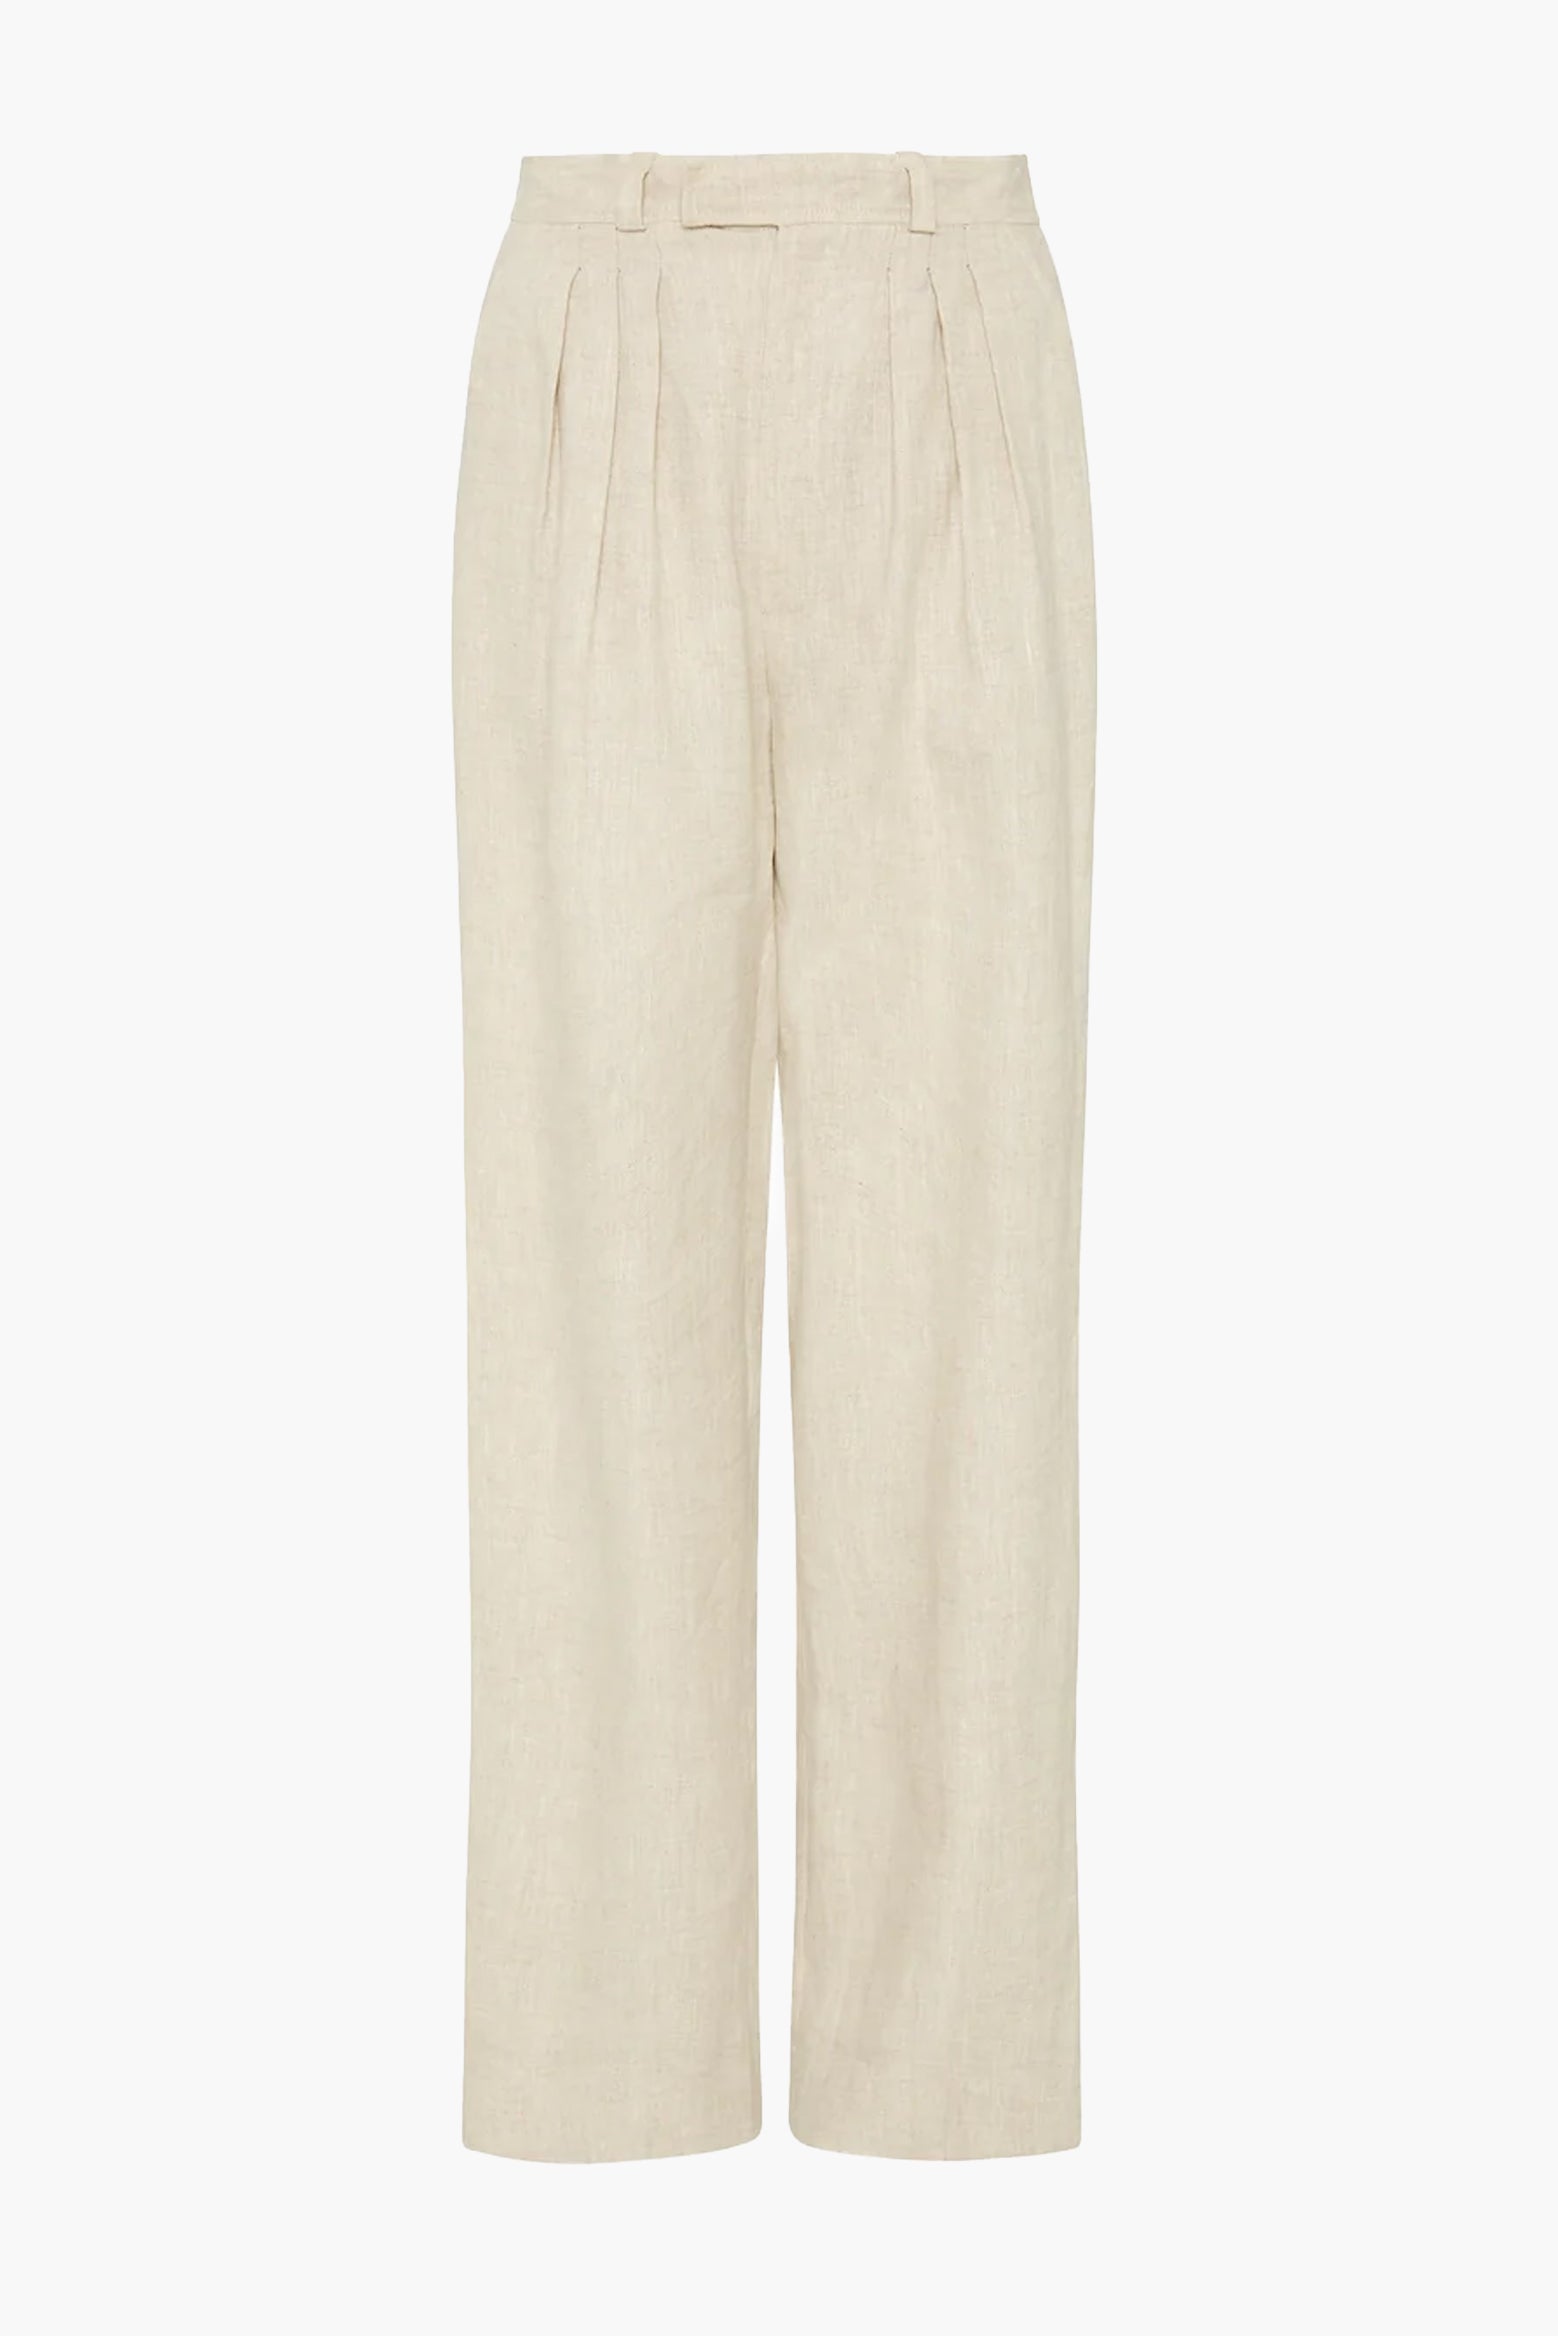 Posse Louis Trouser in Natural available at The New Trend Australia. 